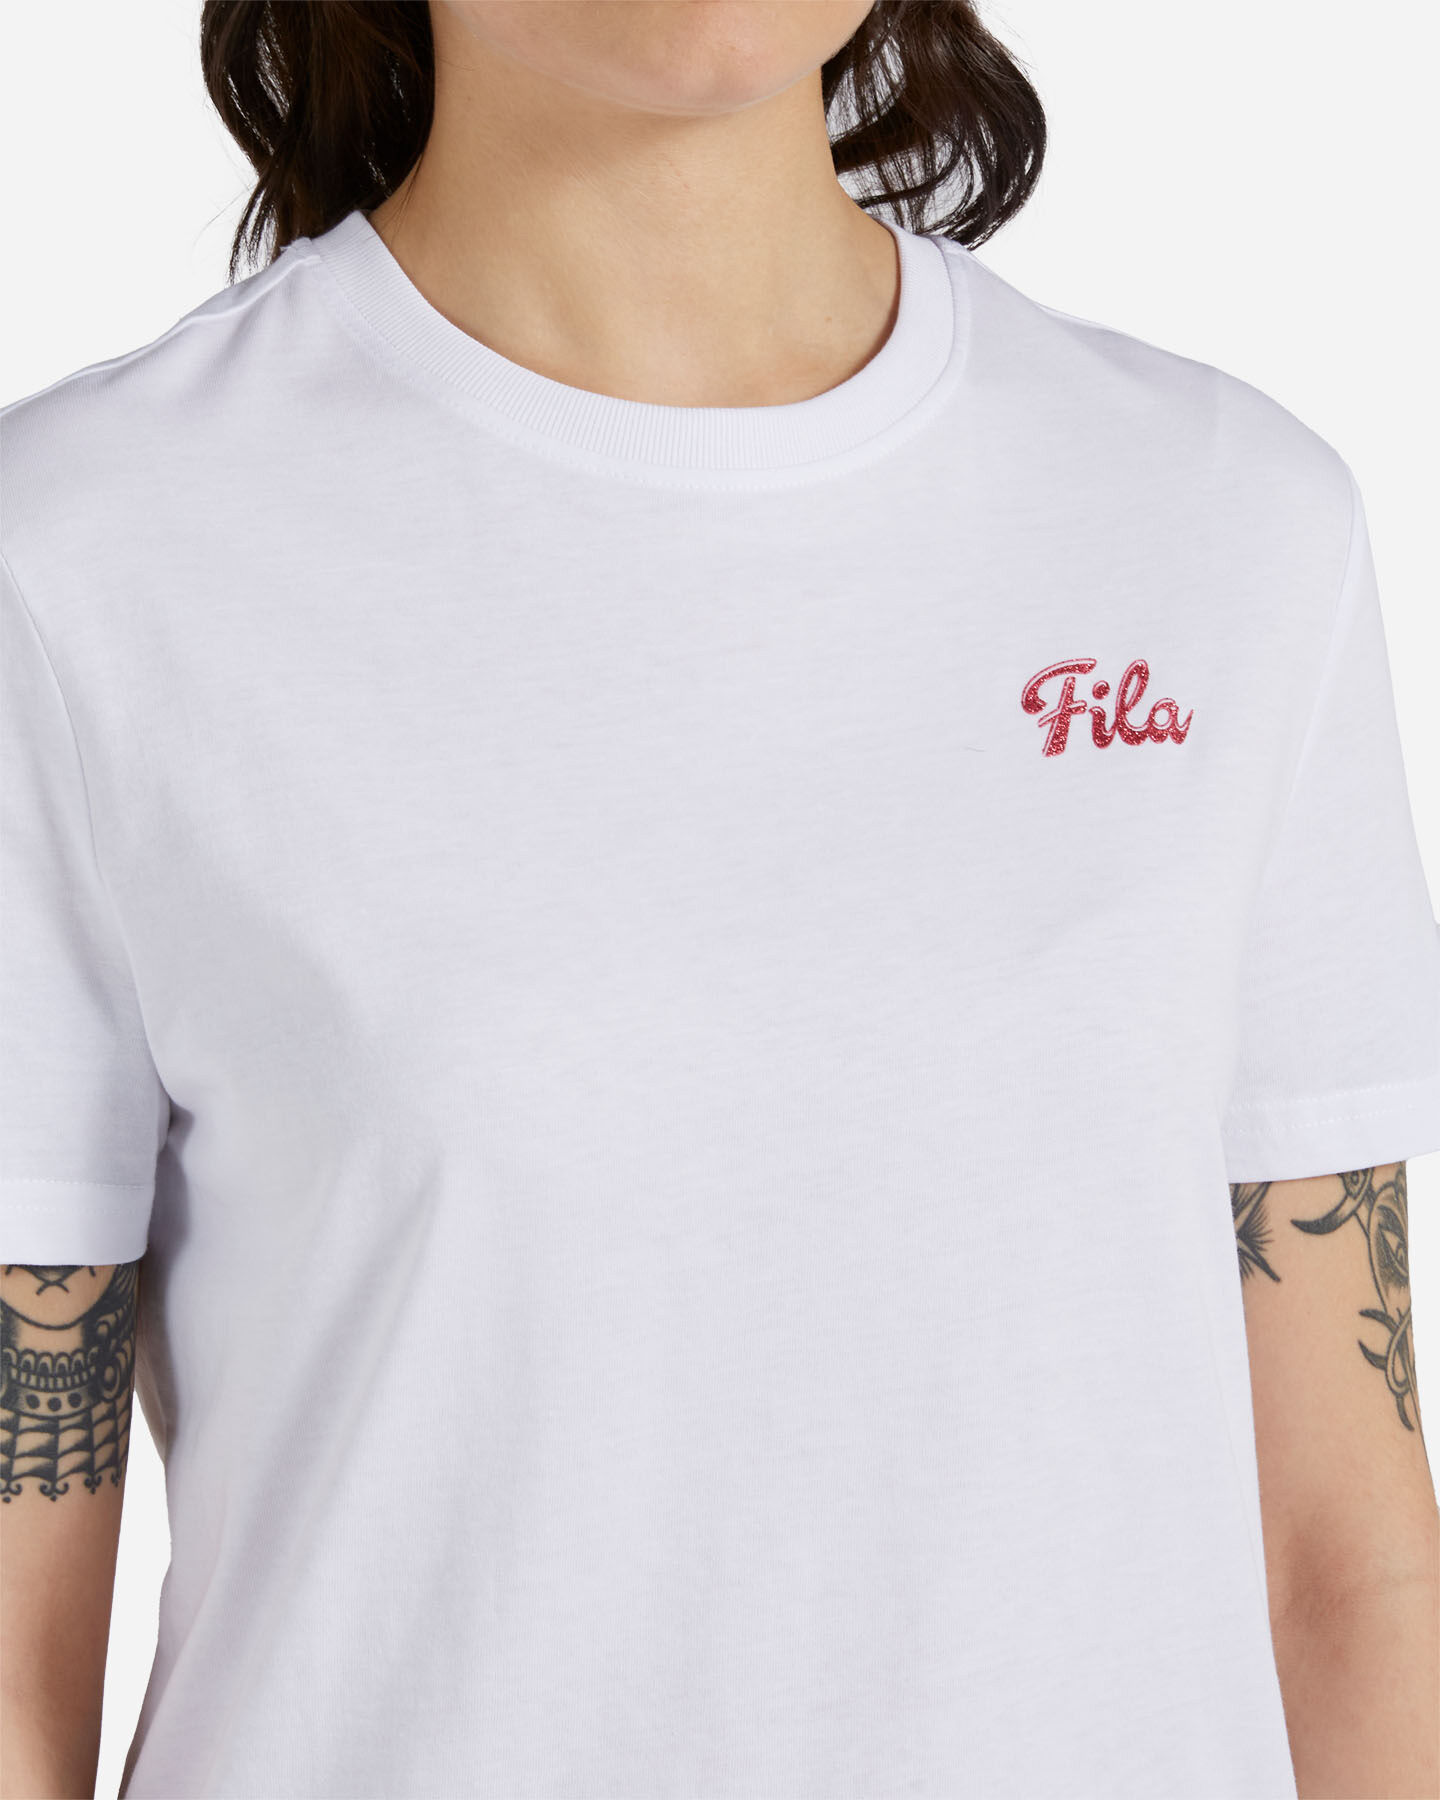  T-Shirt FILA CANDY POP COLLECTION W S4130242|001|XS scatto 4